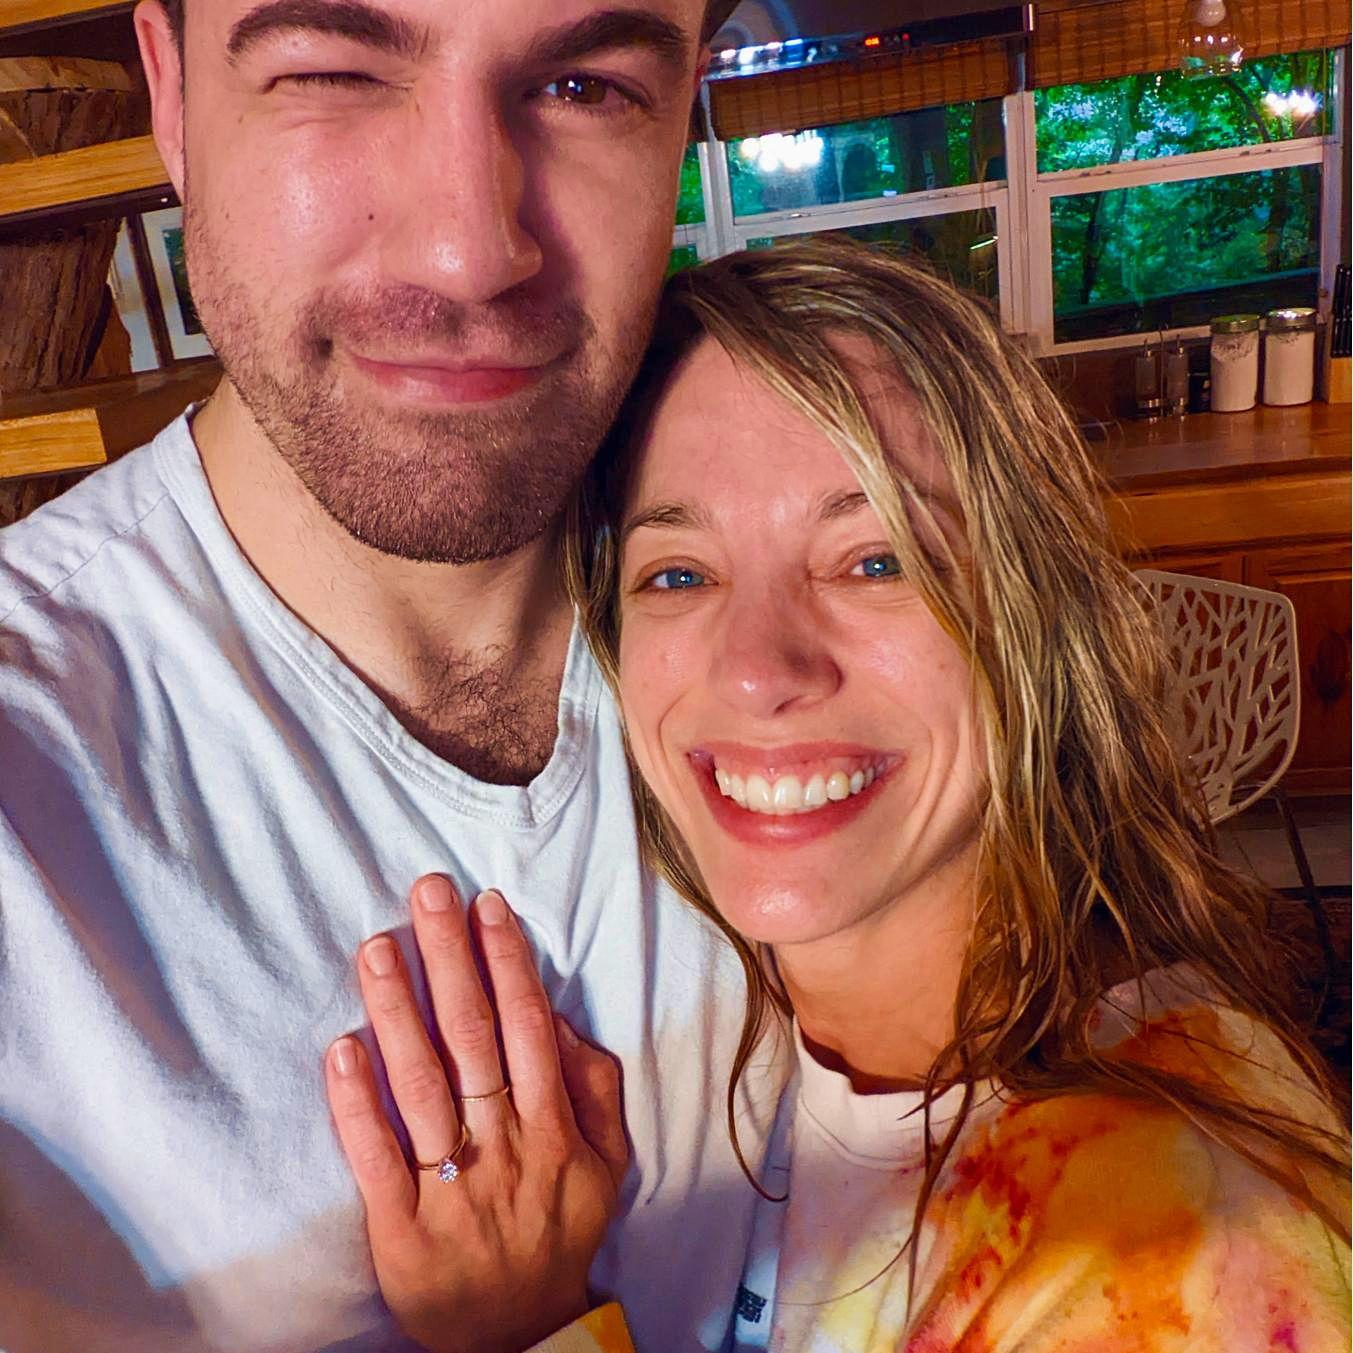 engaged in a rainstorm!